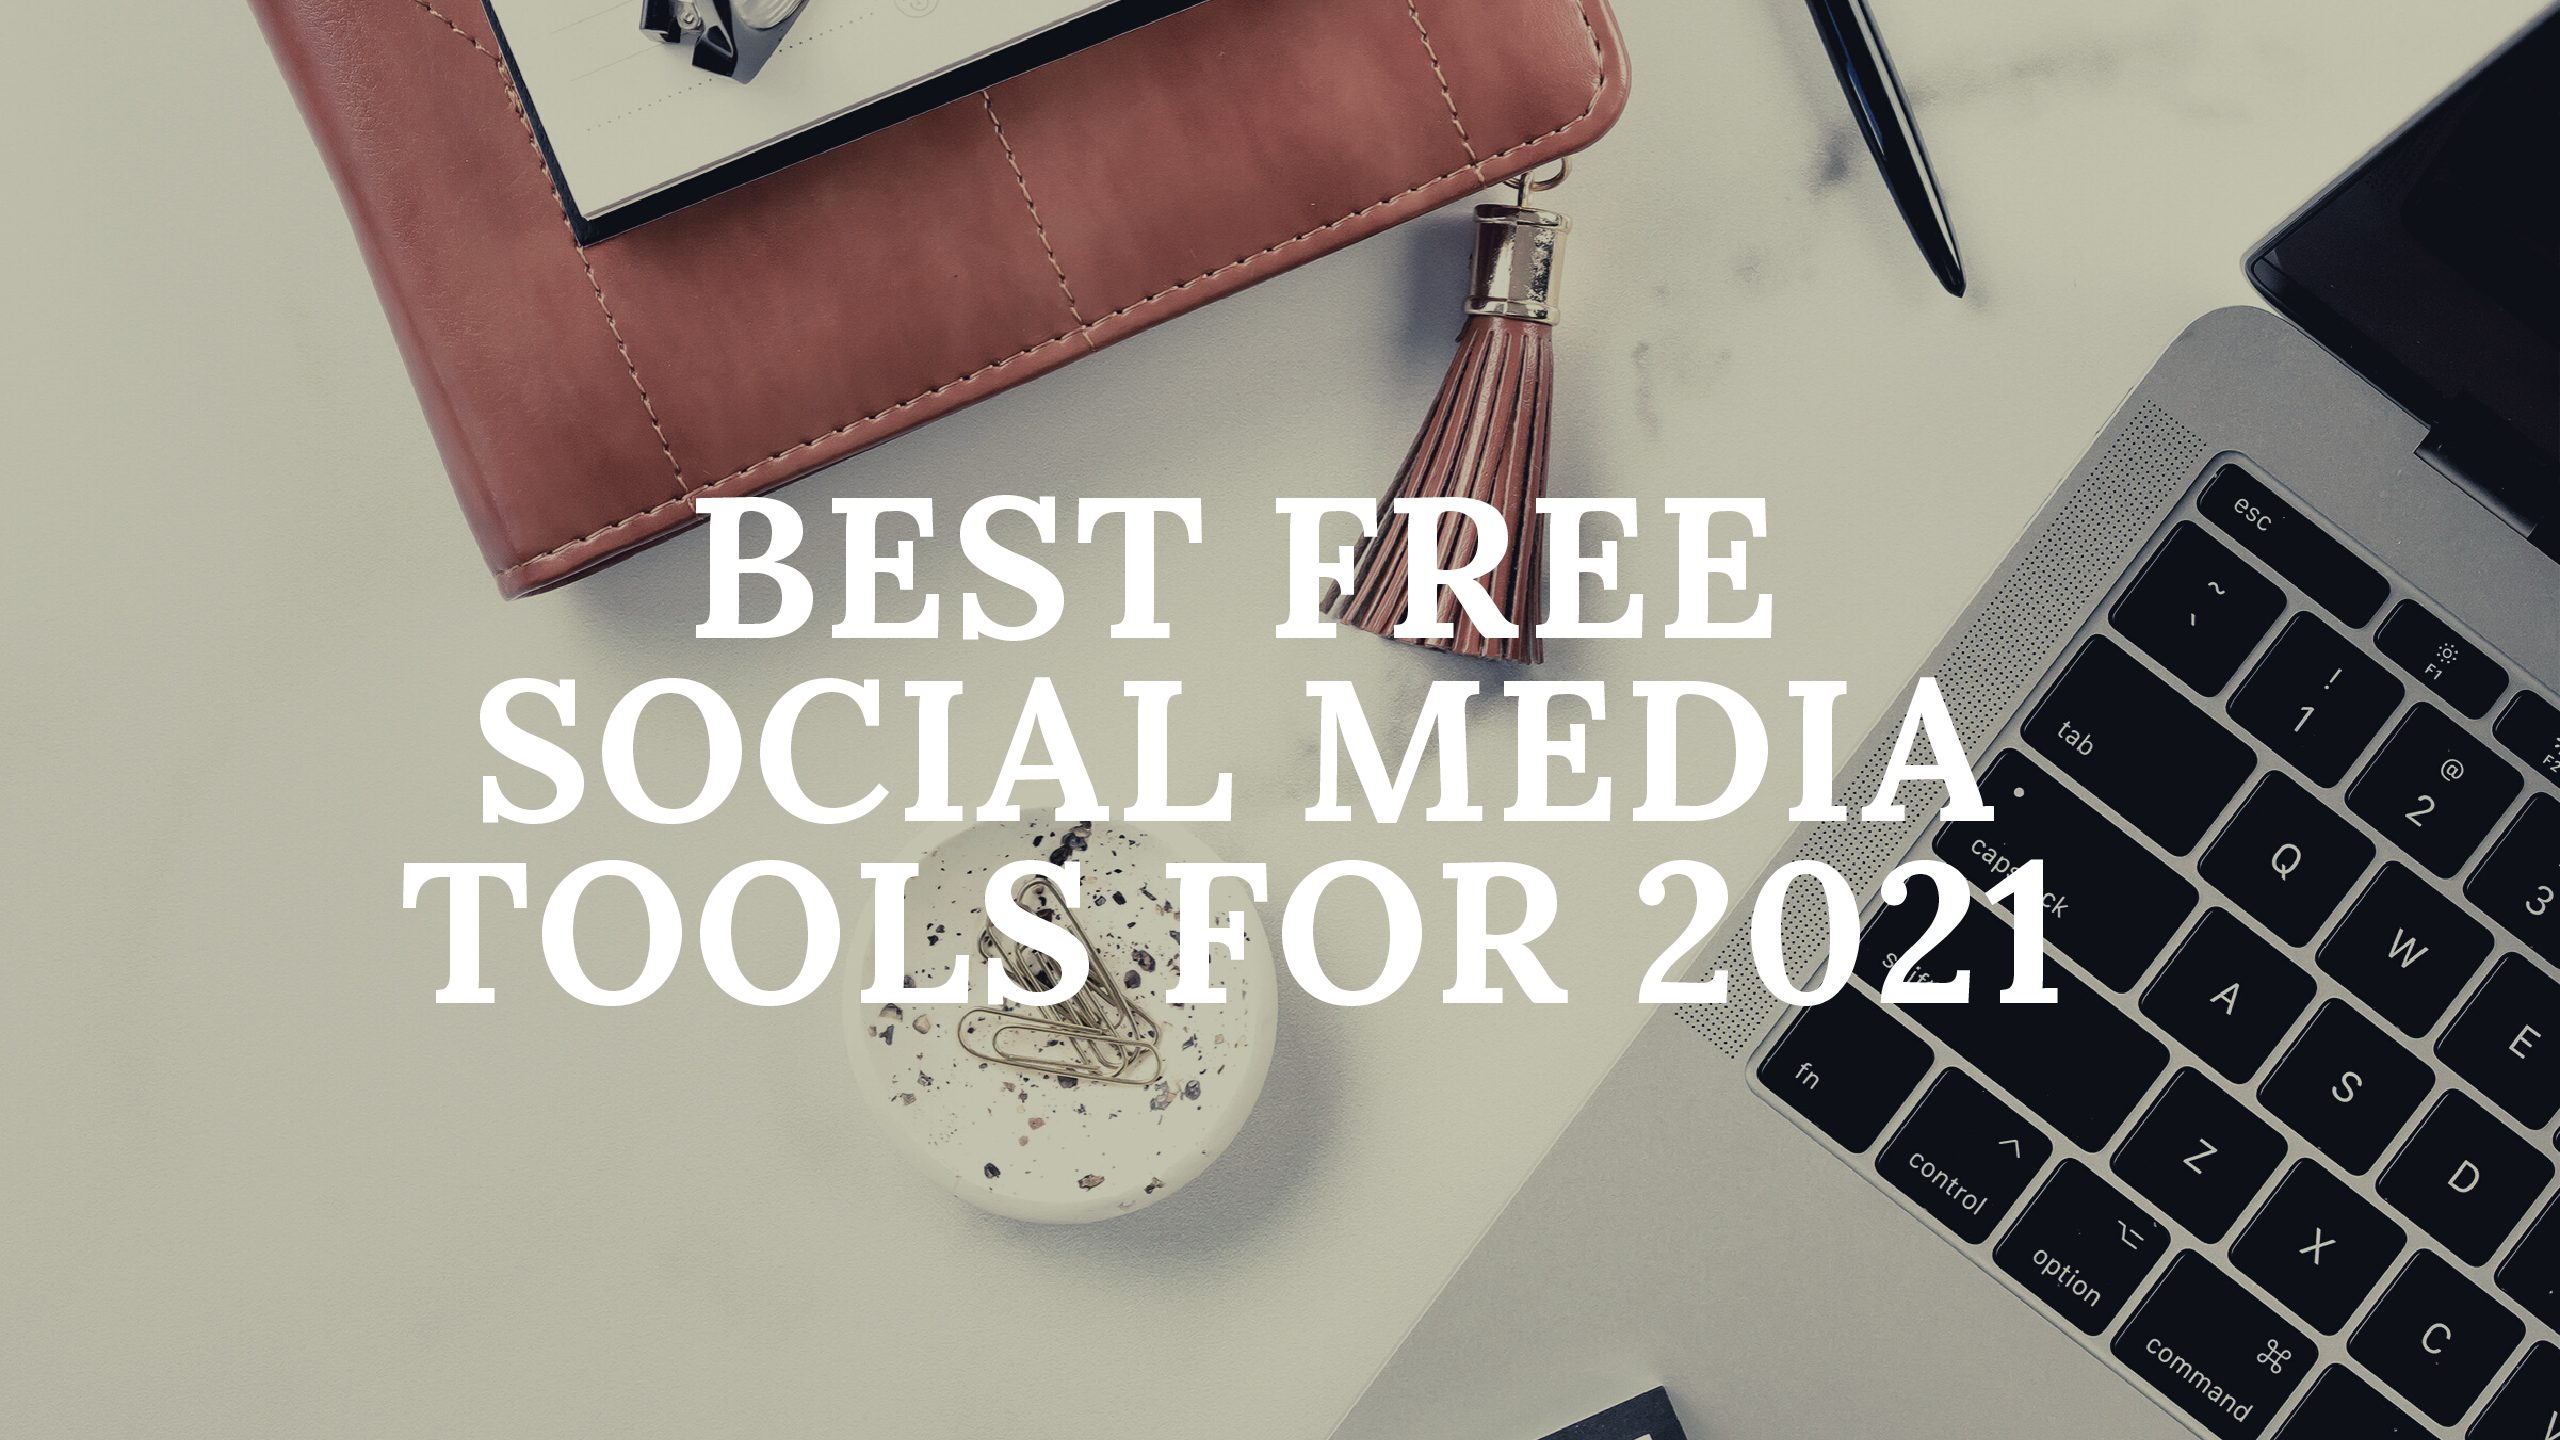 Best Free Social Media Tools for 2021